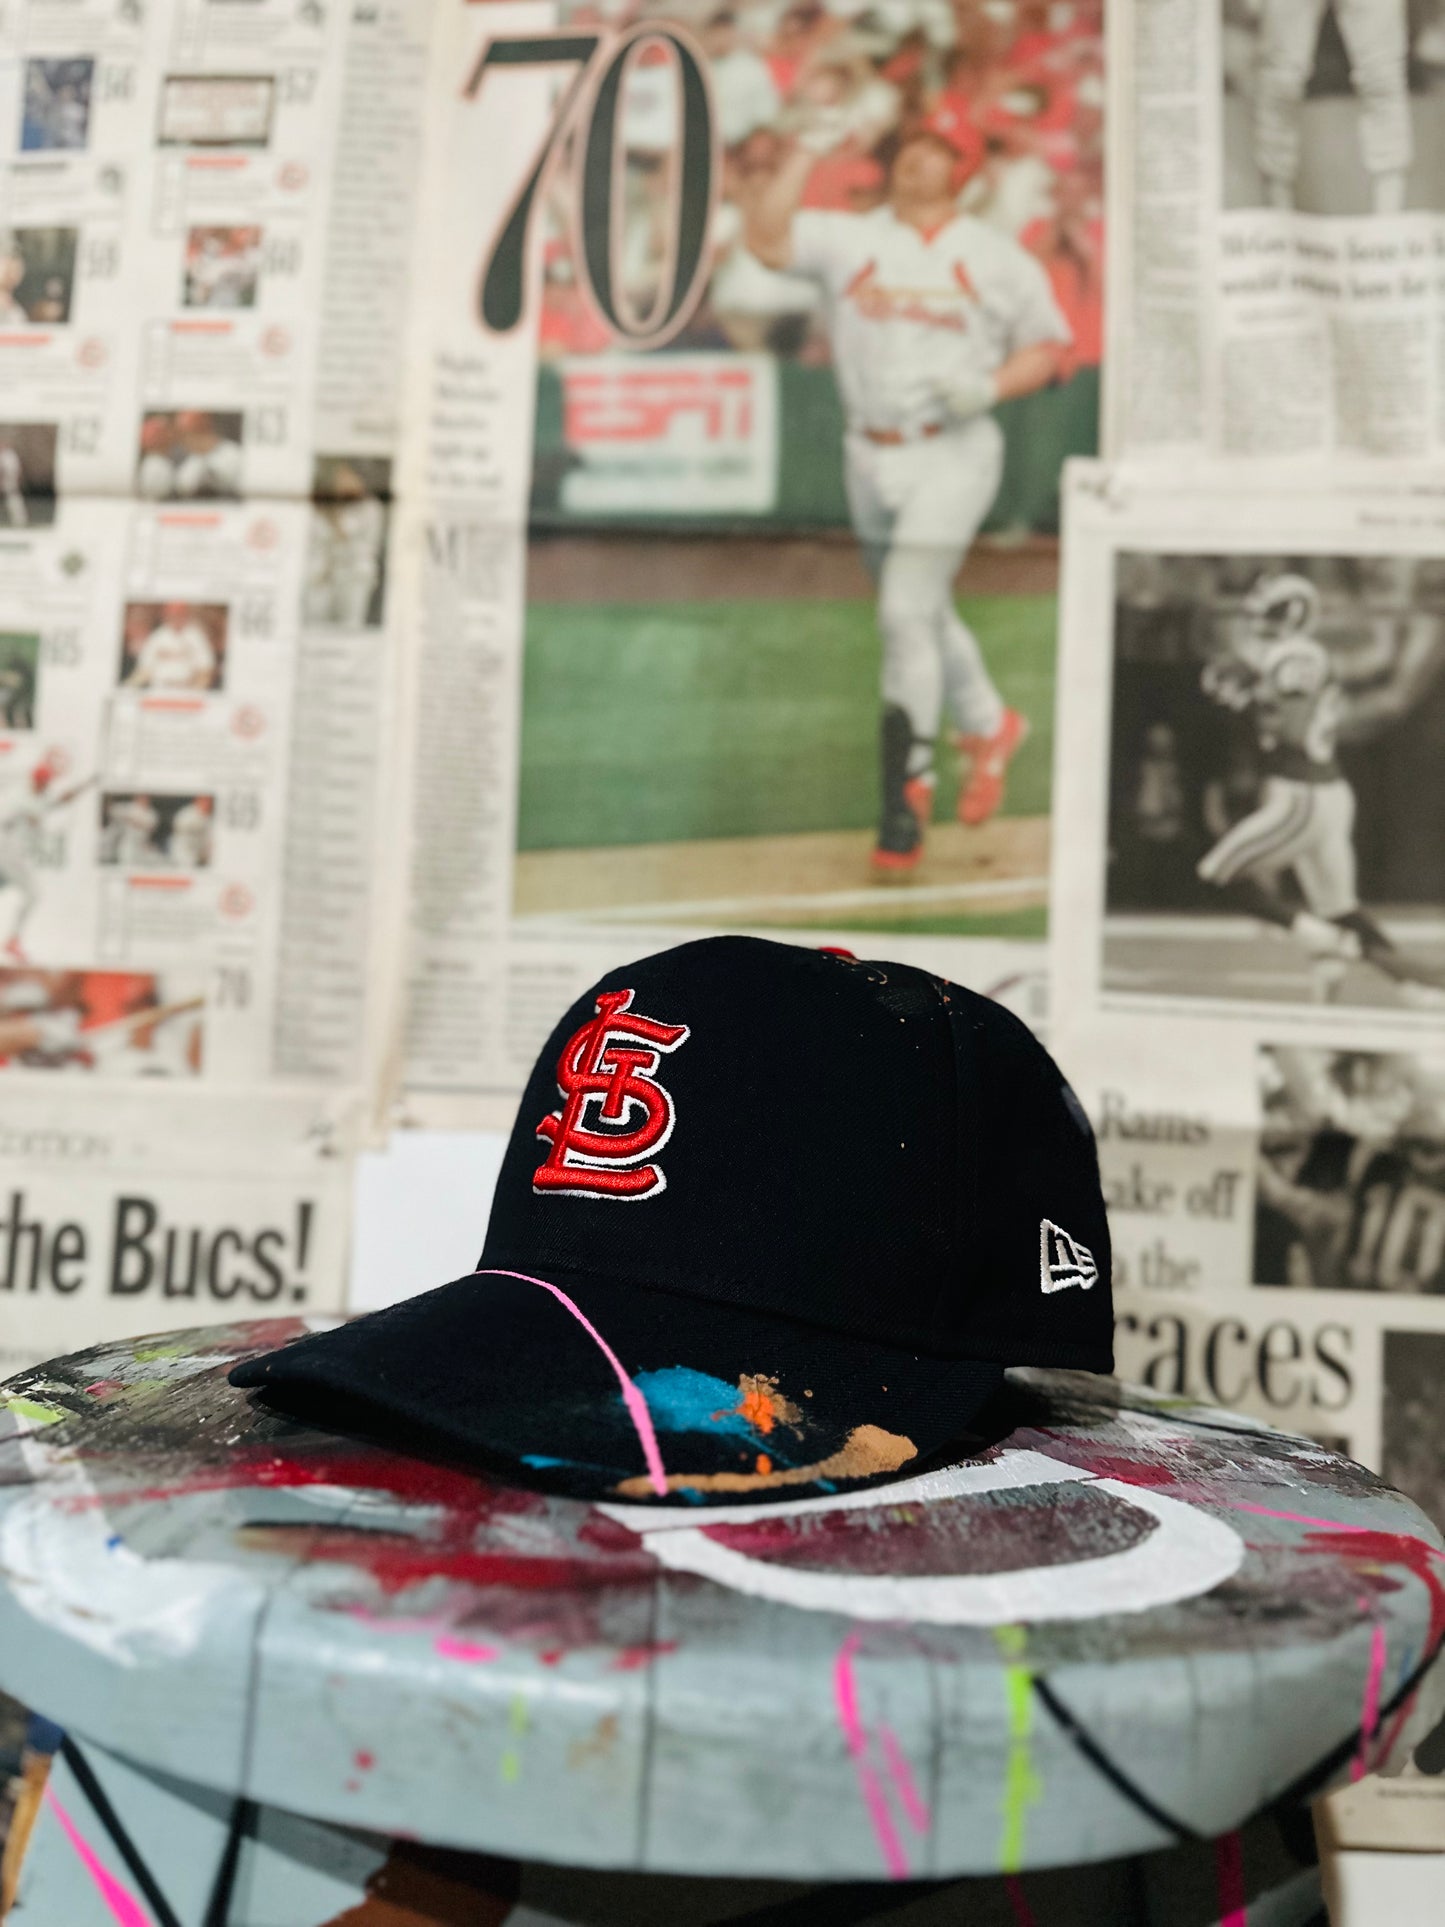 EnD x STL nEw Era “fittEd” away